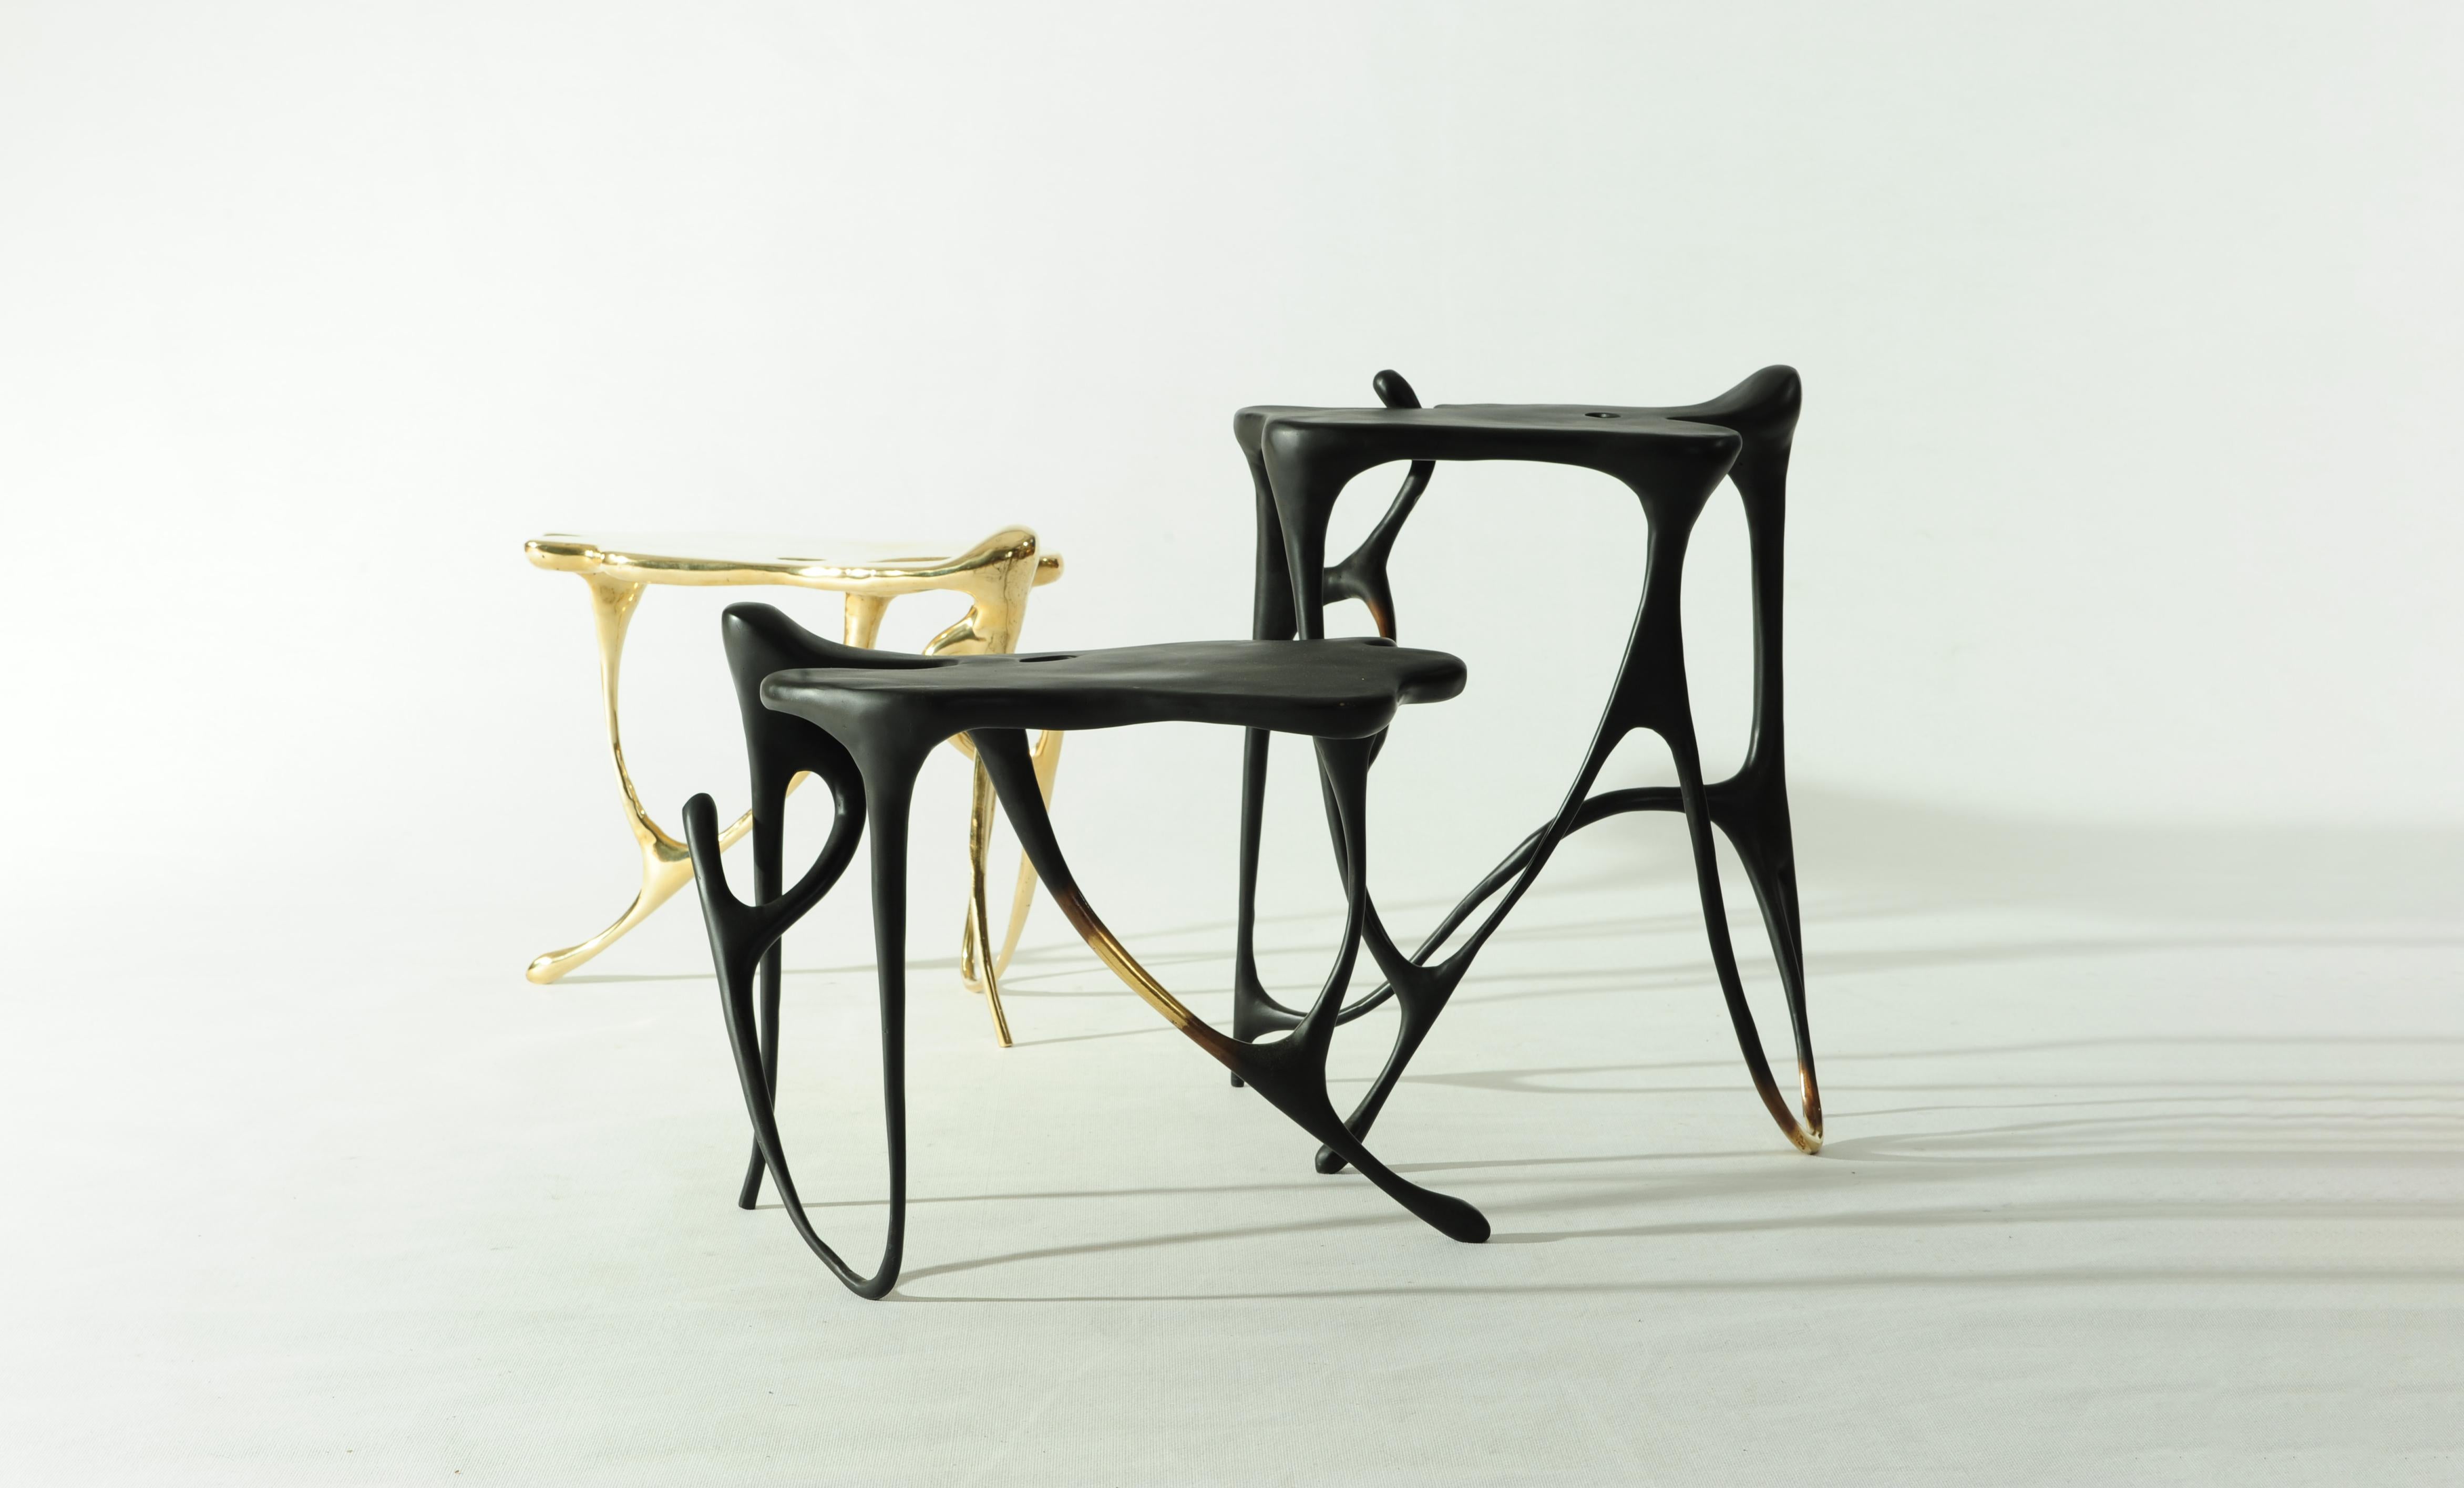 Calligraphic Sculpted Brass Side Table by Misaya For Sale 2